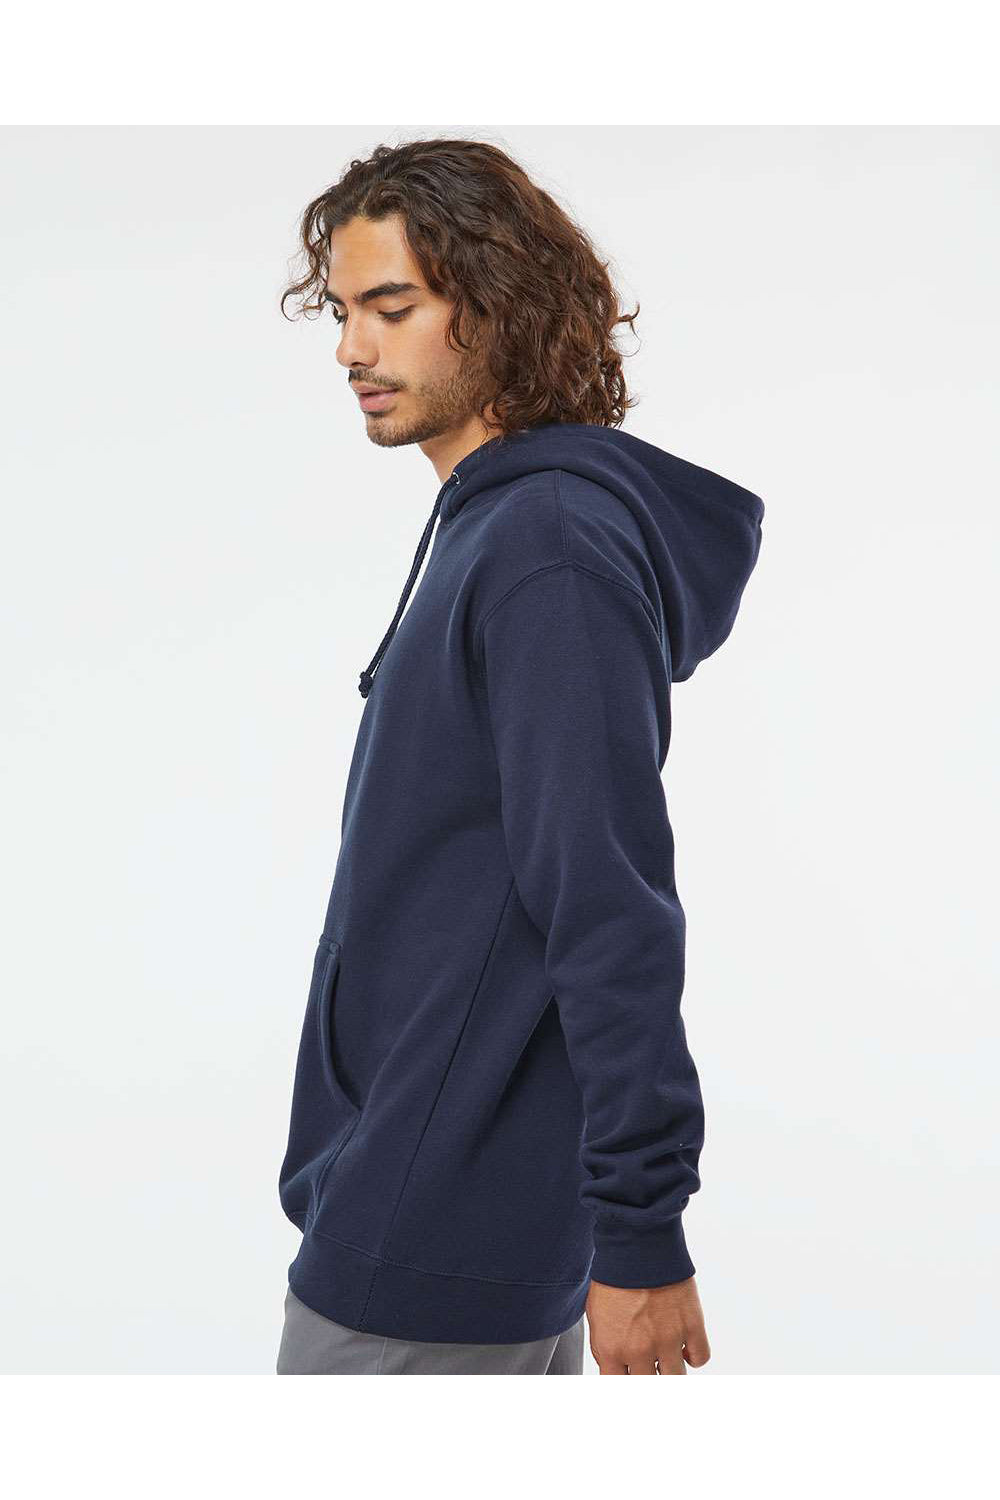 Independent Trading Co. IND4000 Mens Hooded Sweatshirt Hoodie Classic Navy Blue Model Side